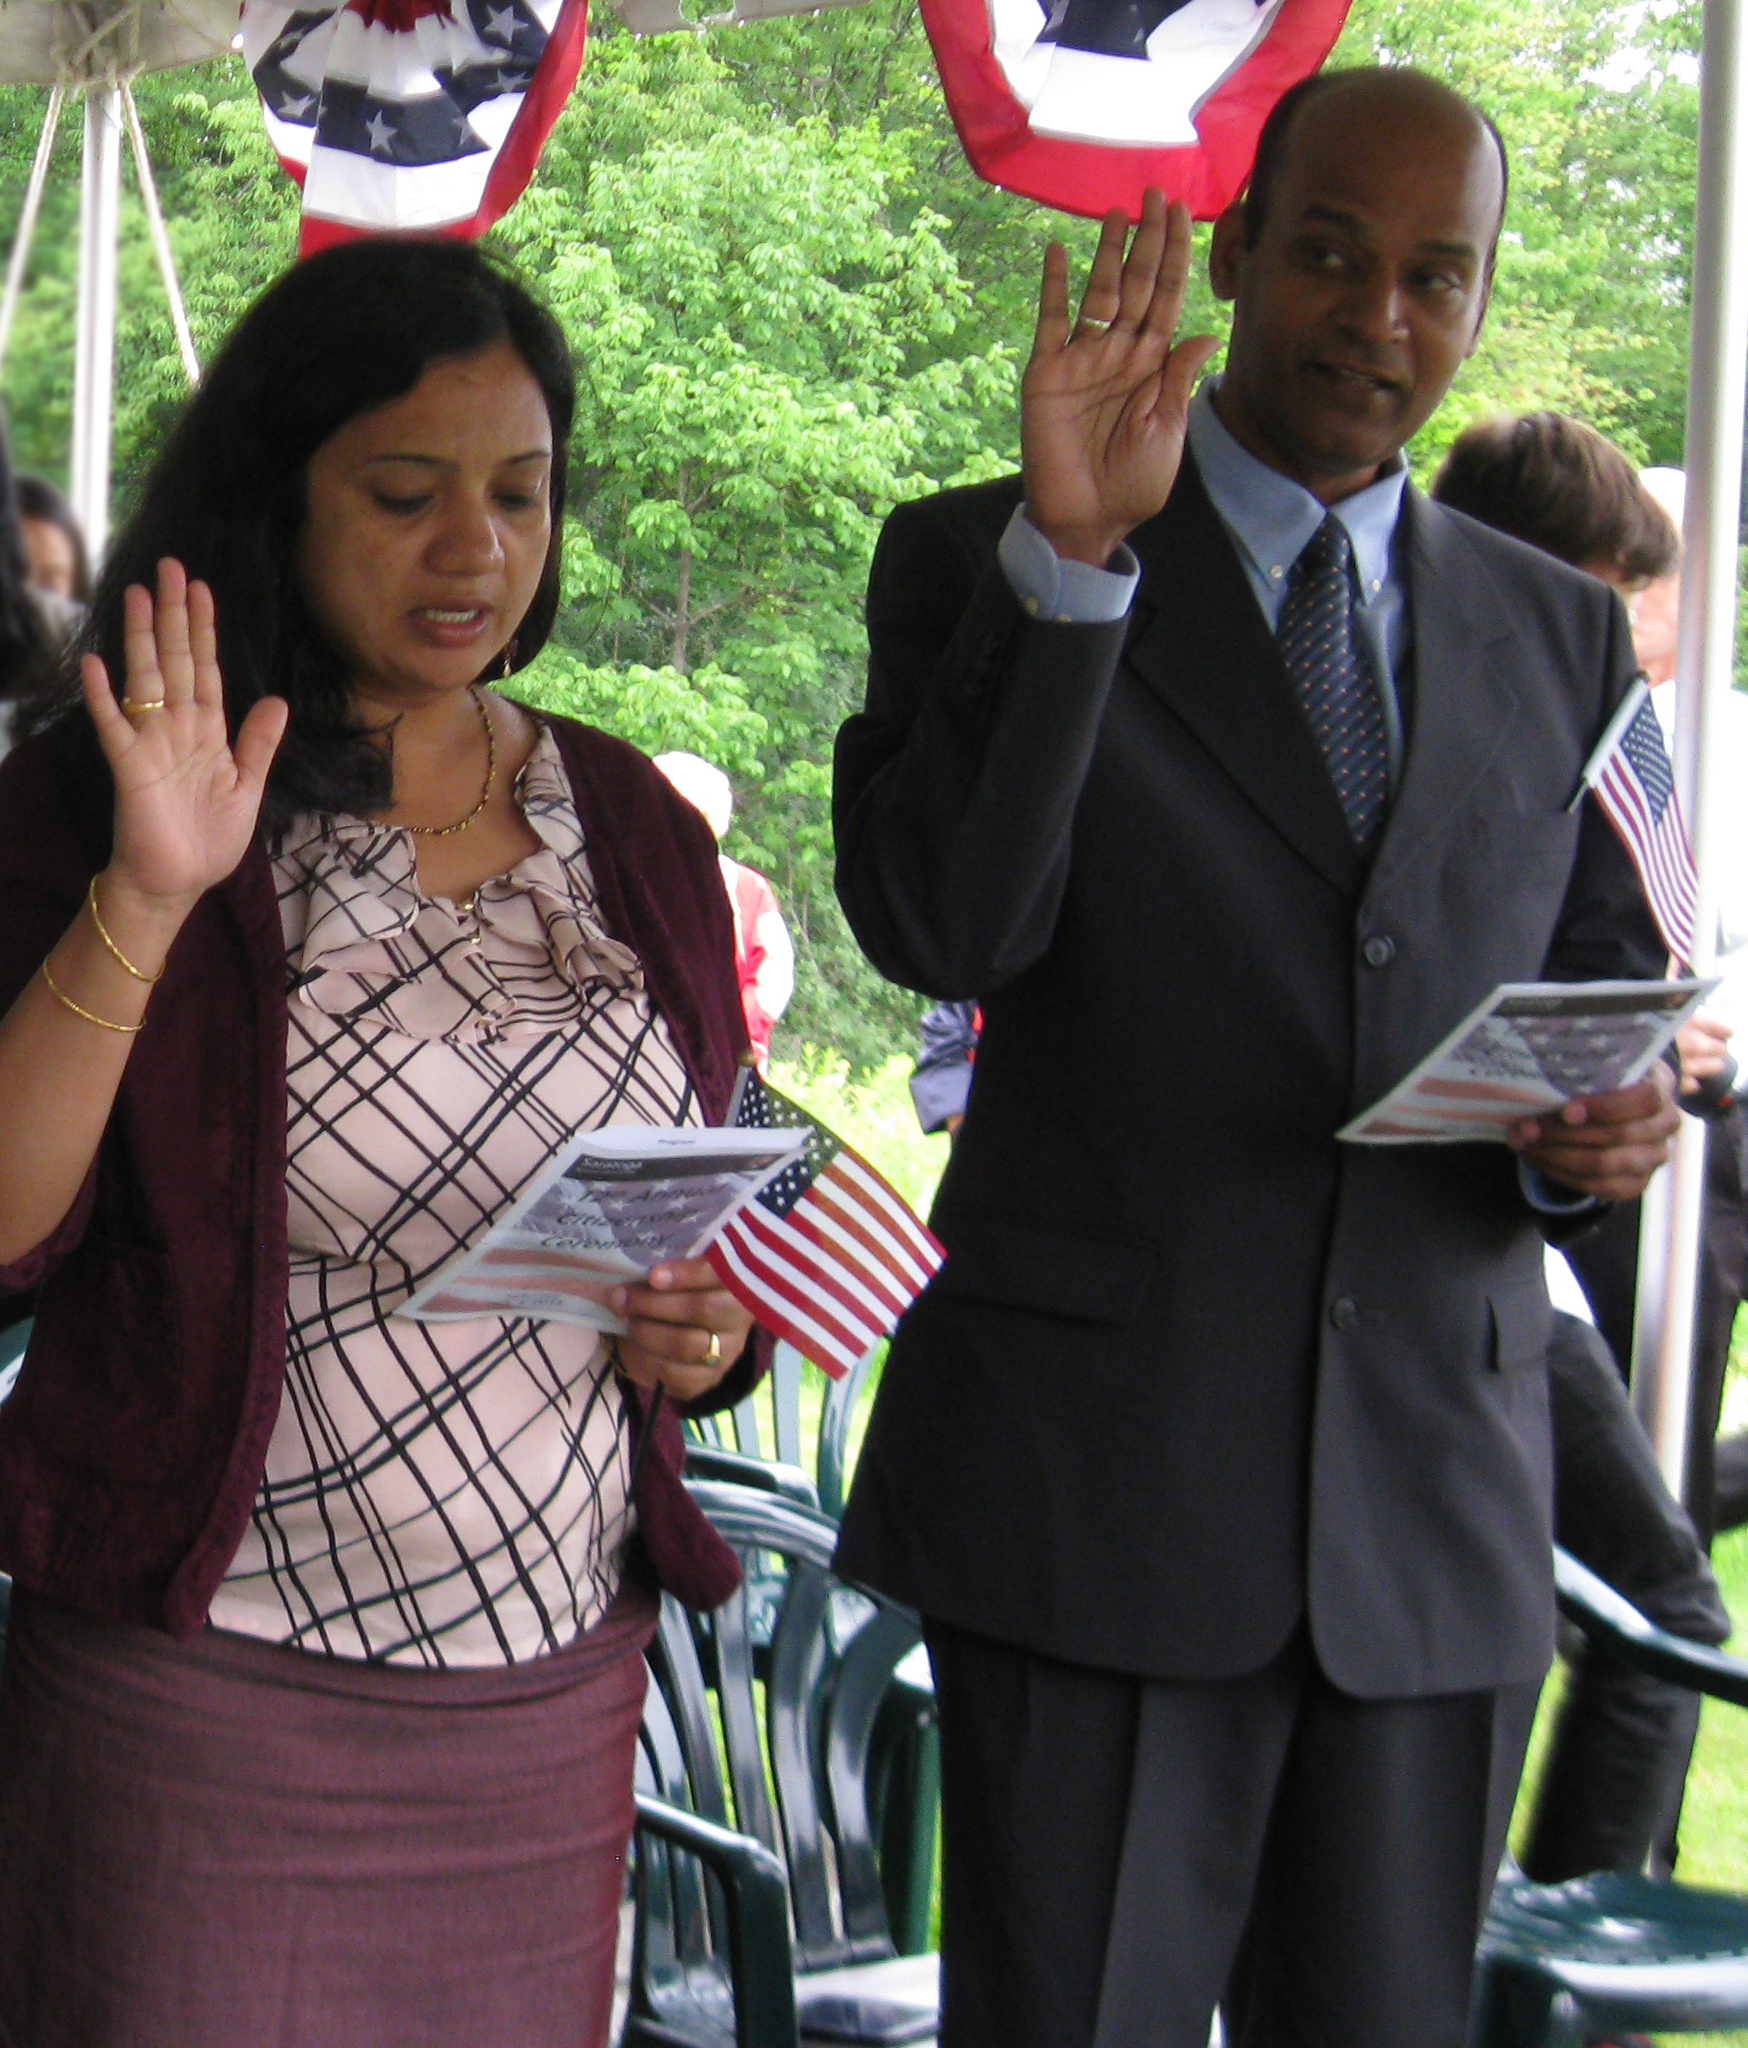 New Citizens